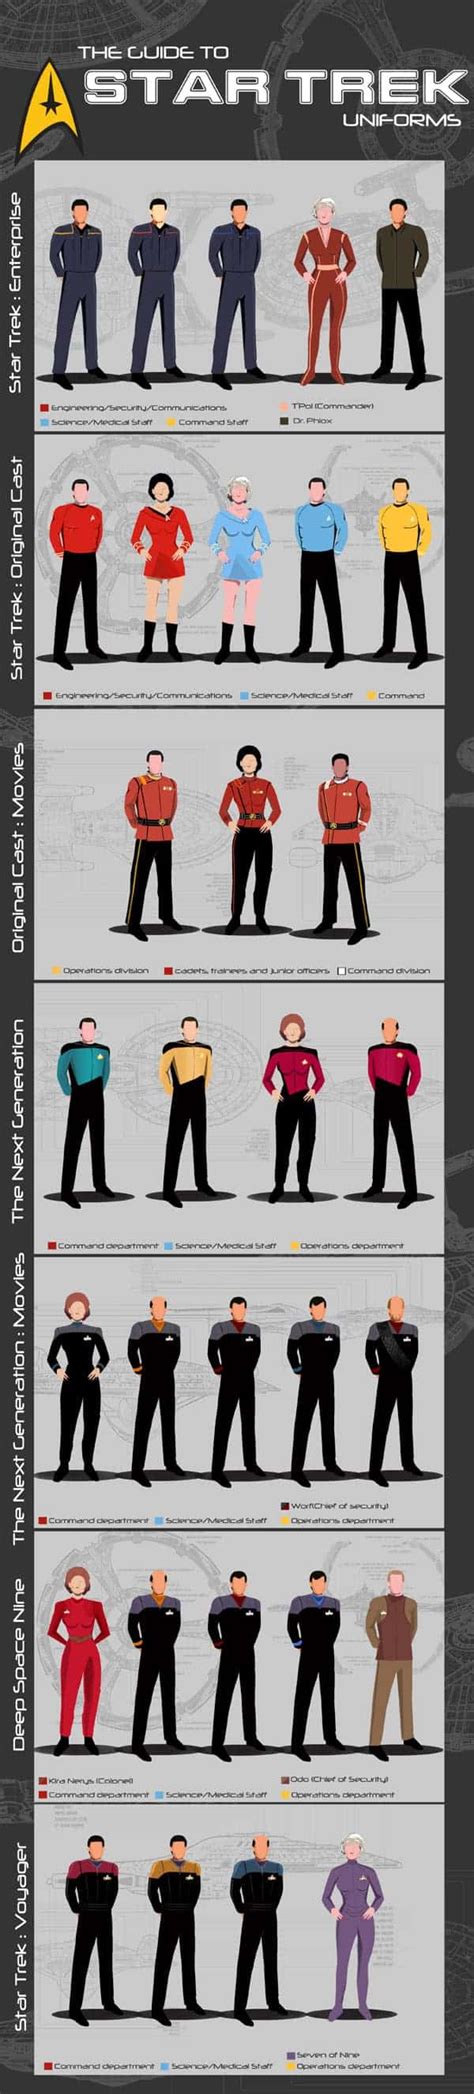 A Guide To Star Trek Uniforms Daily Infographic